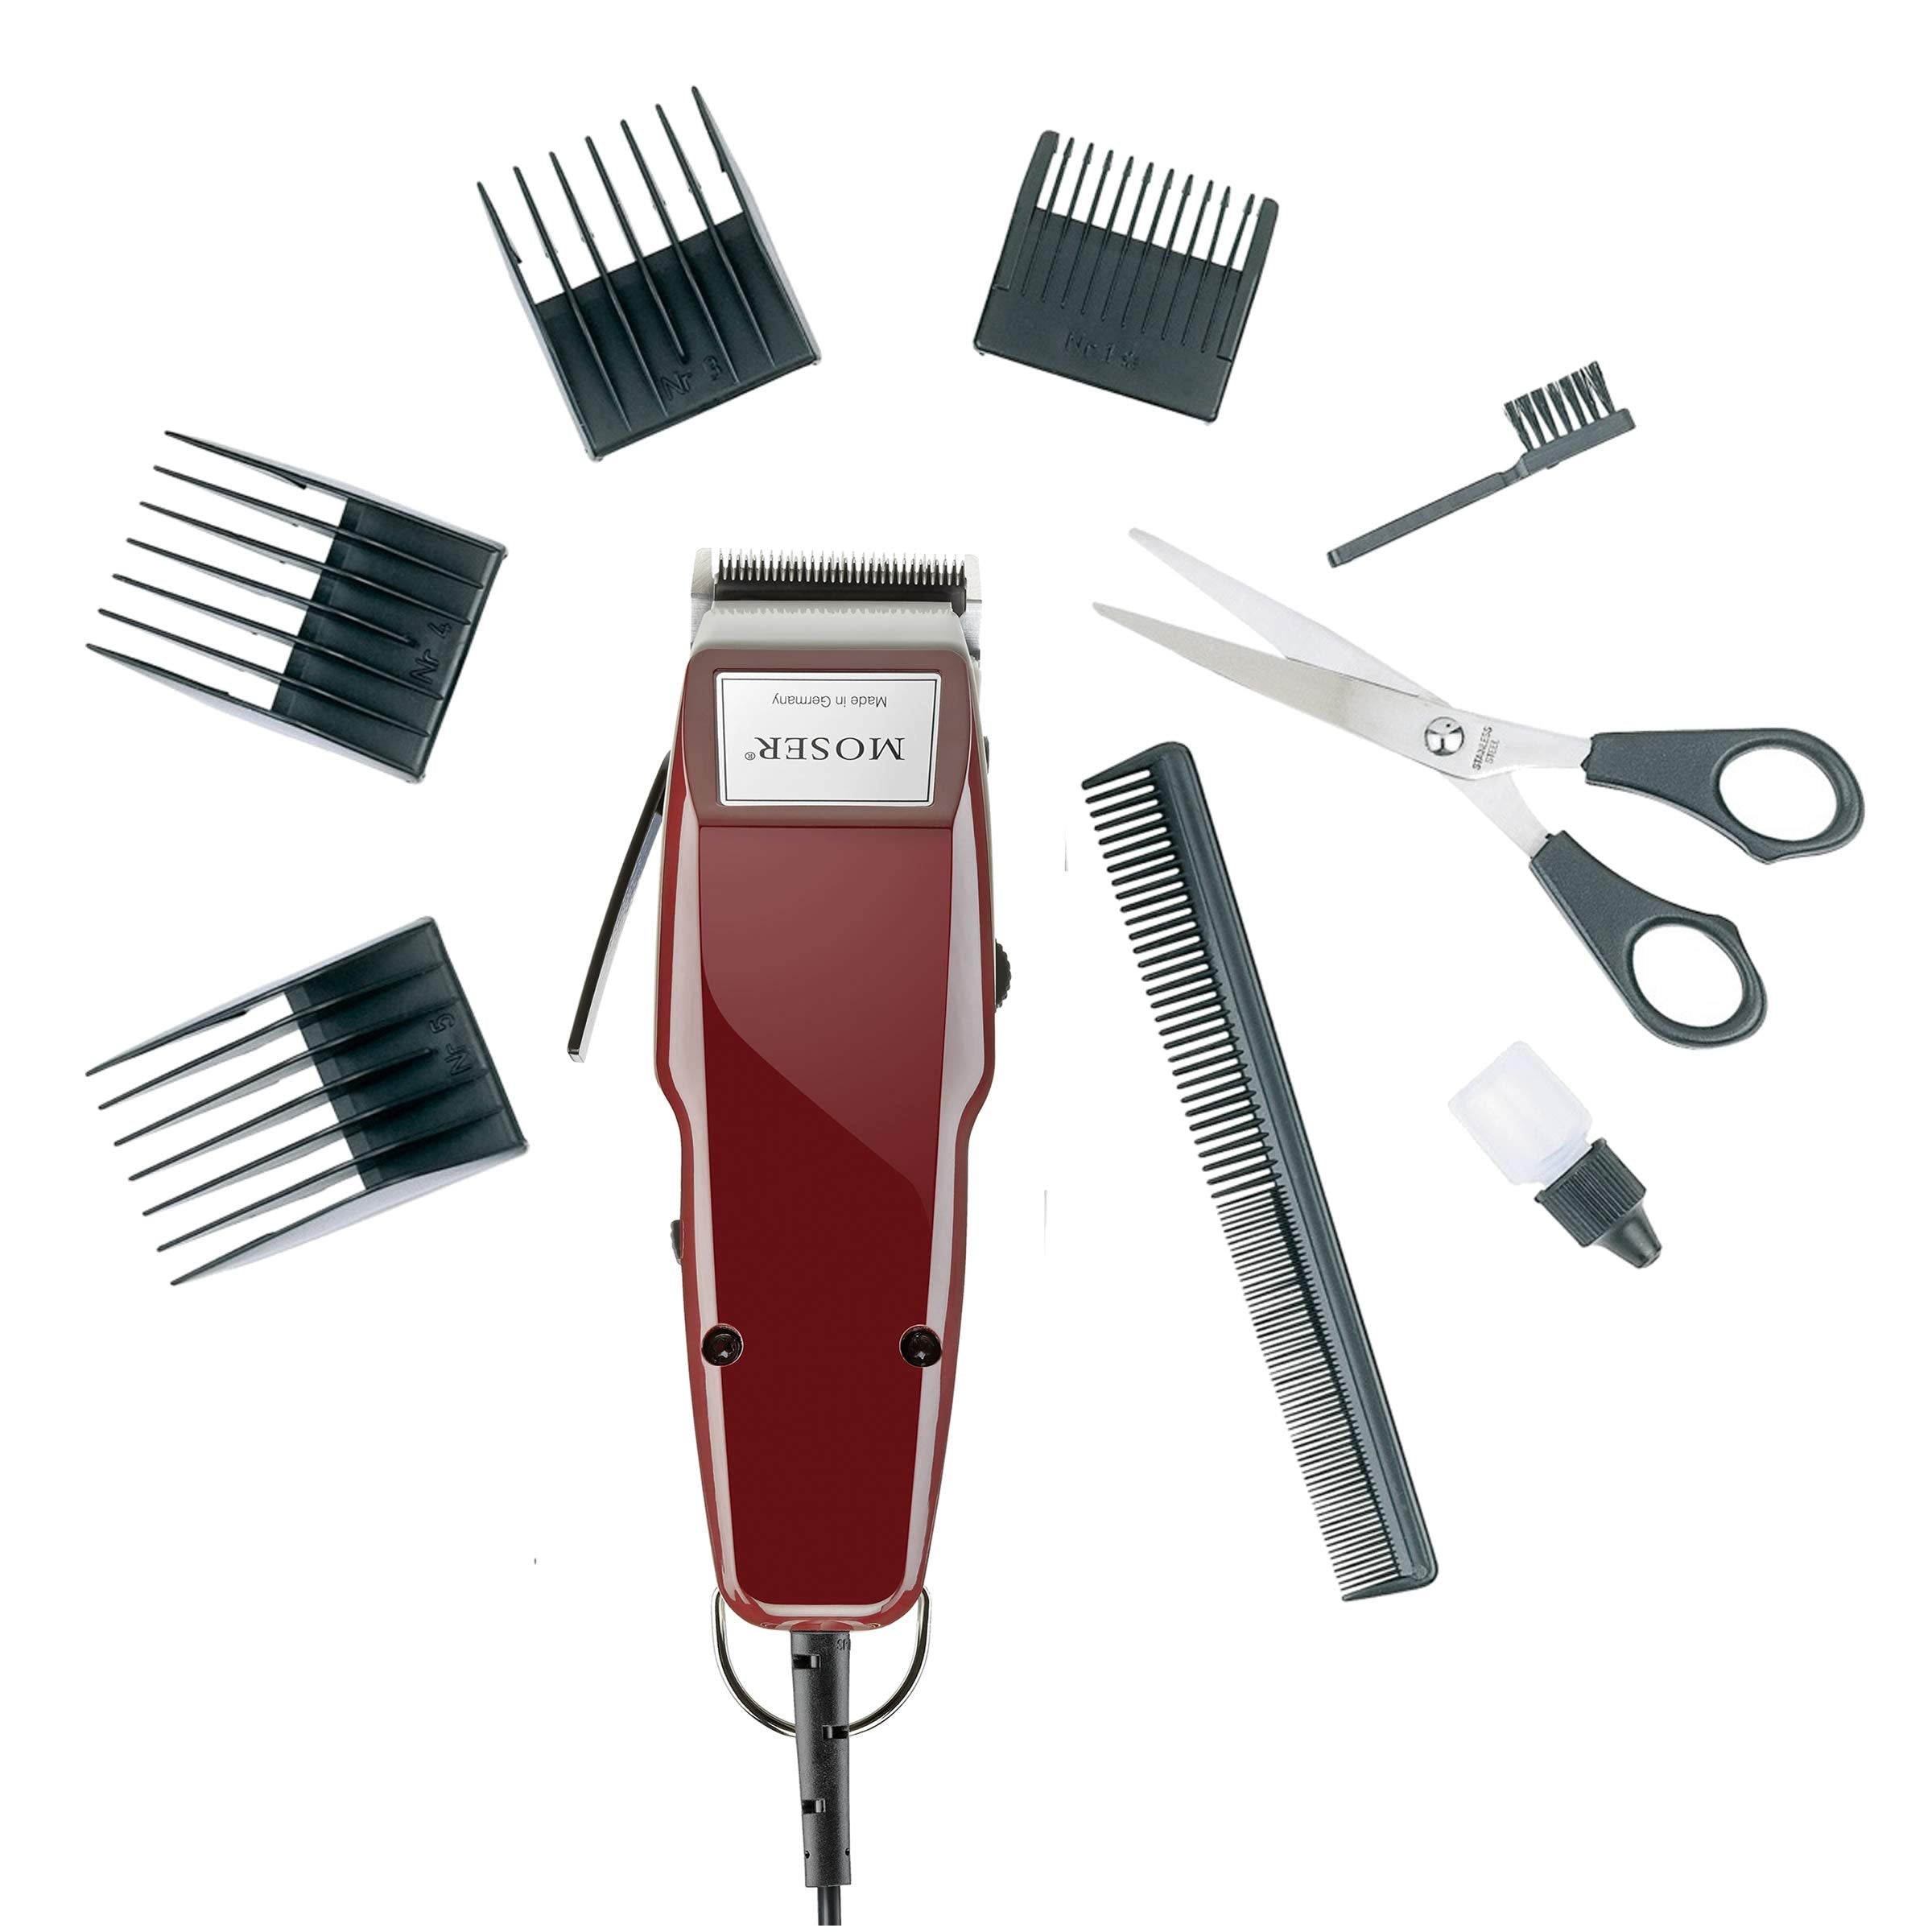 Moser 1400-0378, Professional Corded Hair Clipper, Burgandy Set (Pack Of 1)